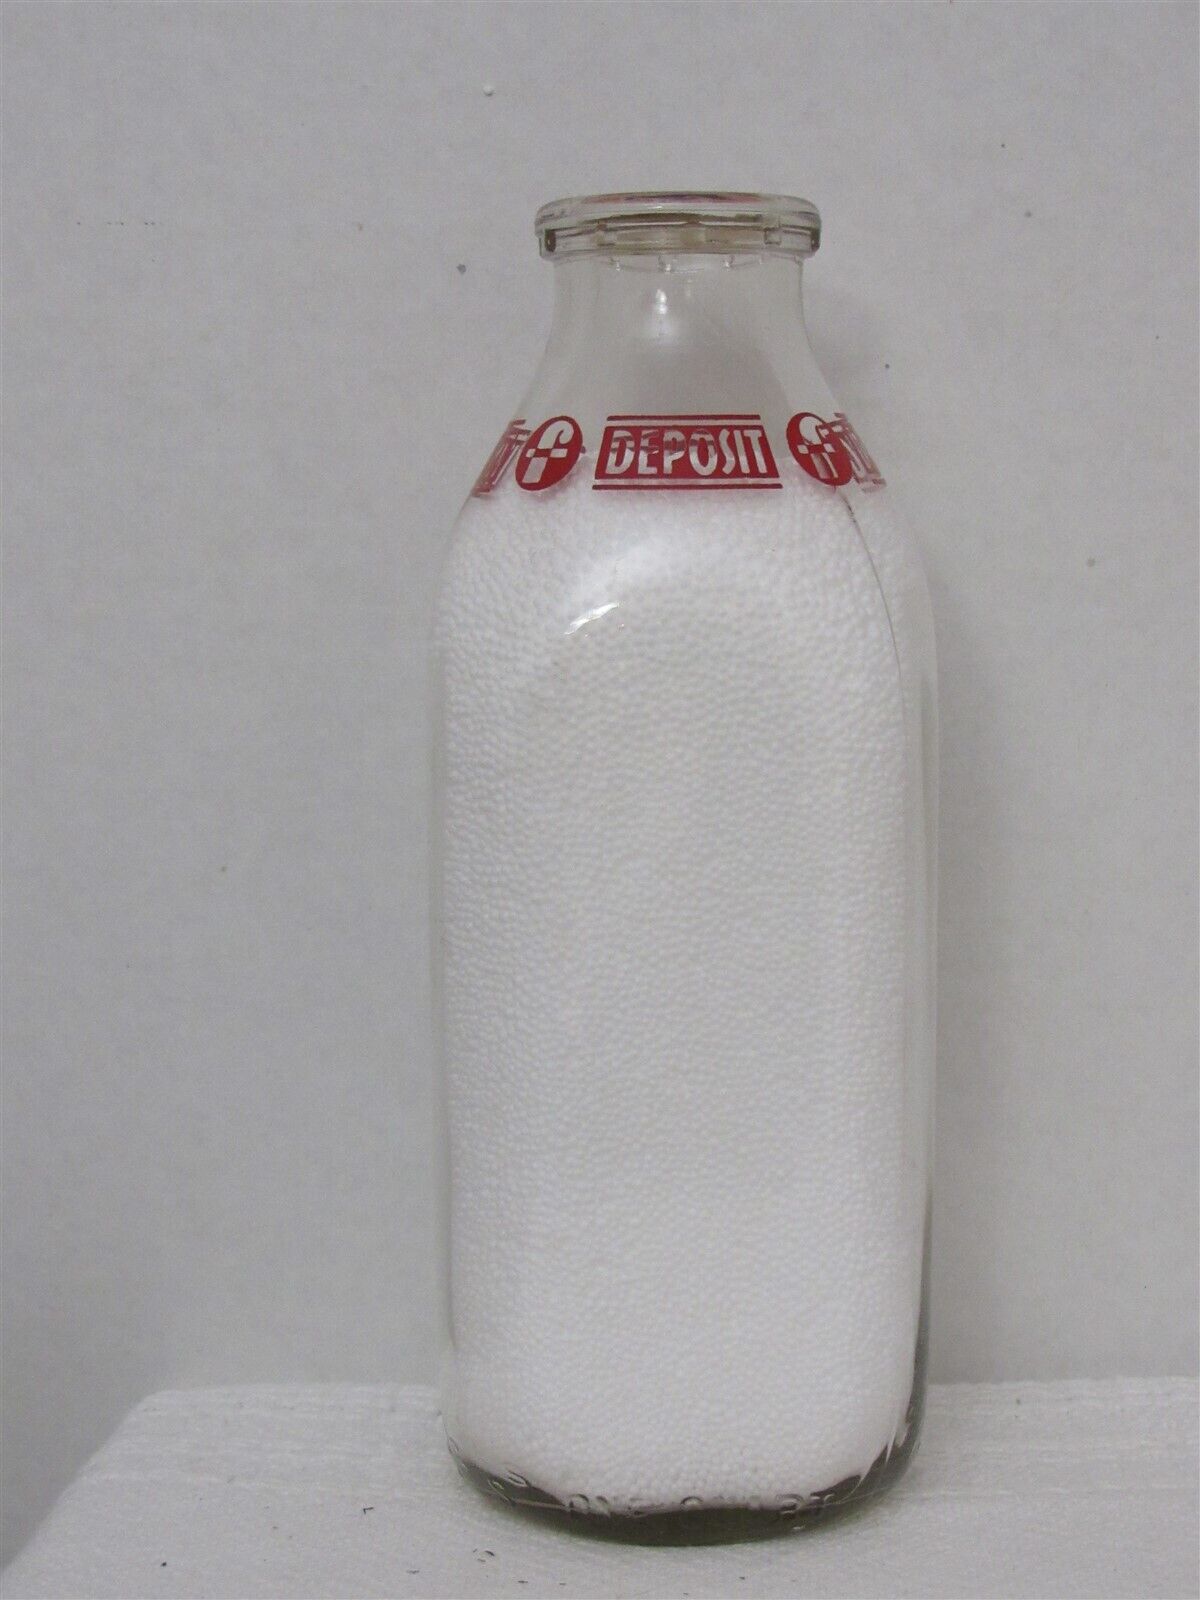 SSPQ Milk Bottle Foremost Dairies Dairy Oakland CA J C Penney ALAMEDA COUNTY \'48